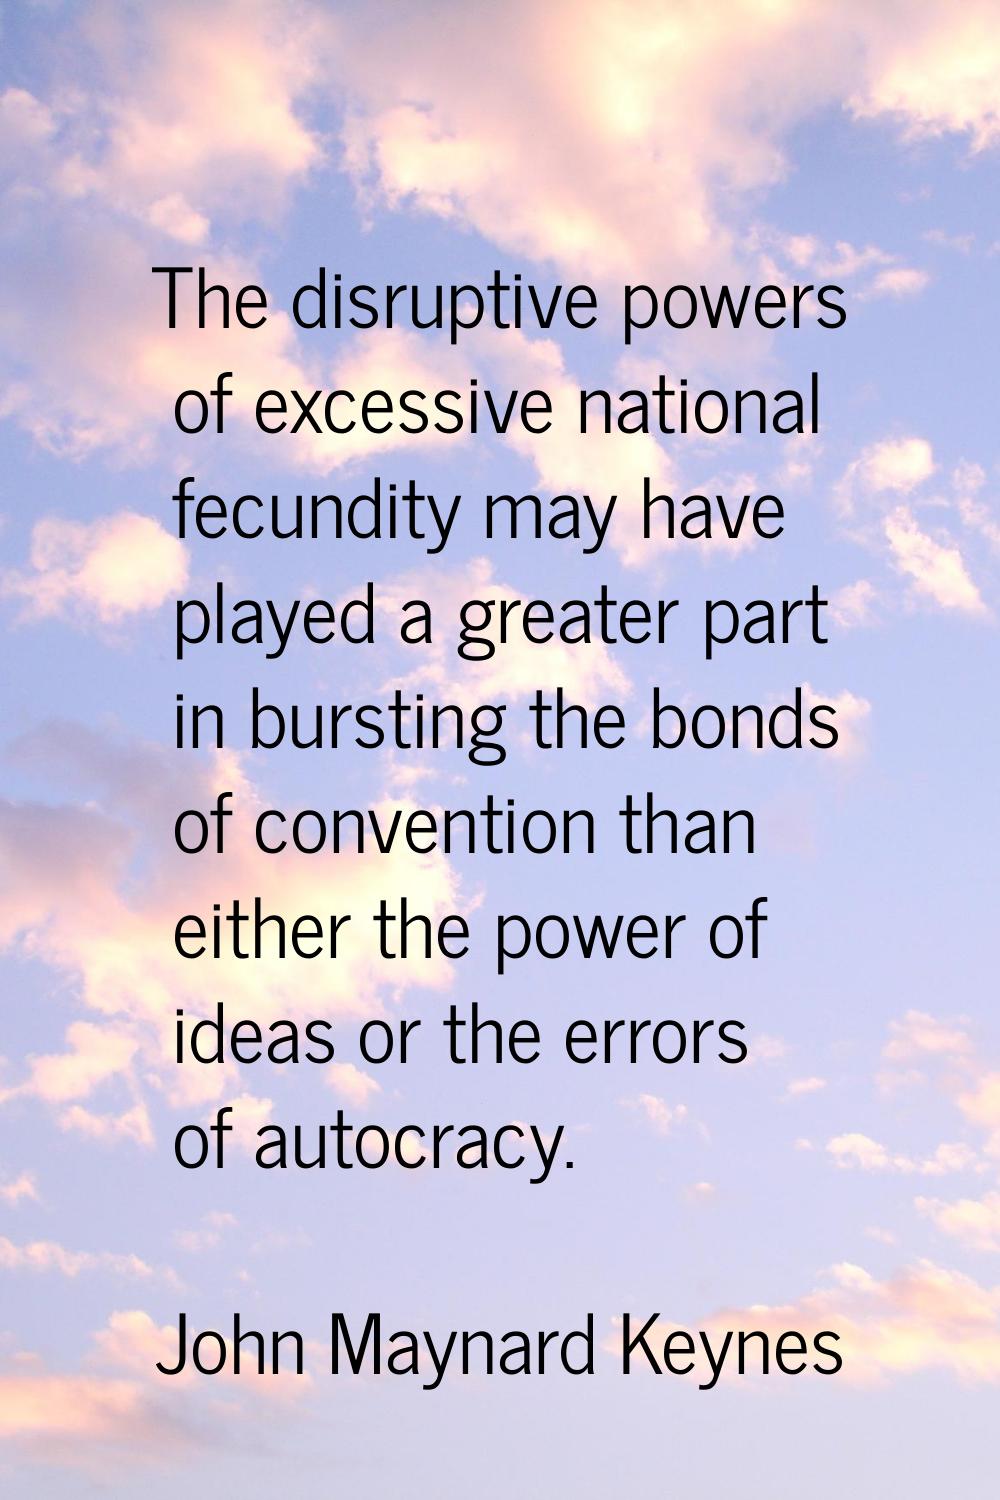 The disruptive powers of excessive national fecundity may have played a greater part in bursting th